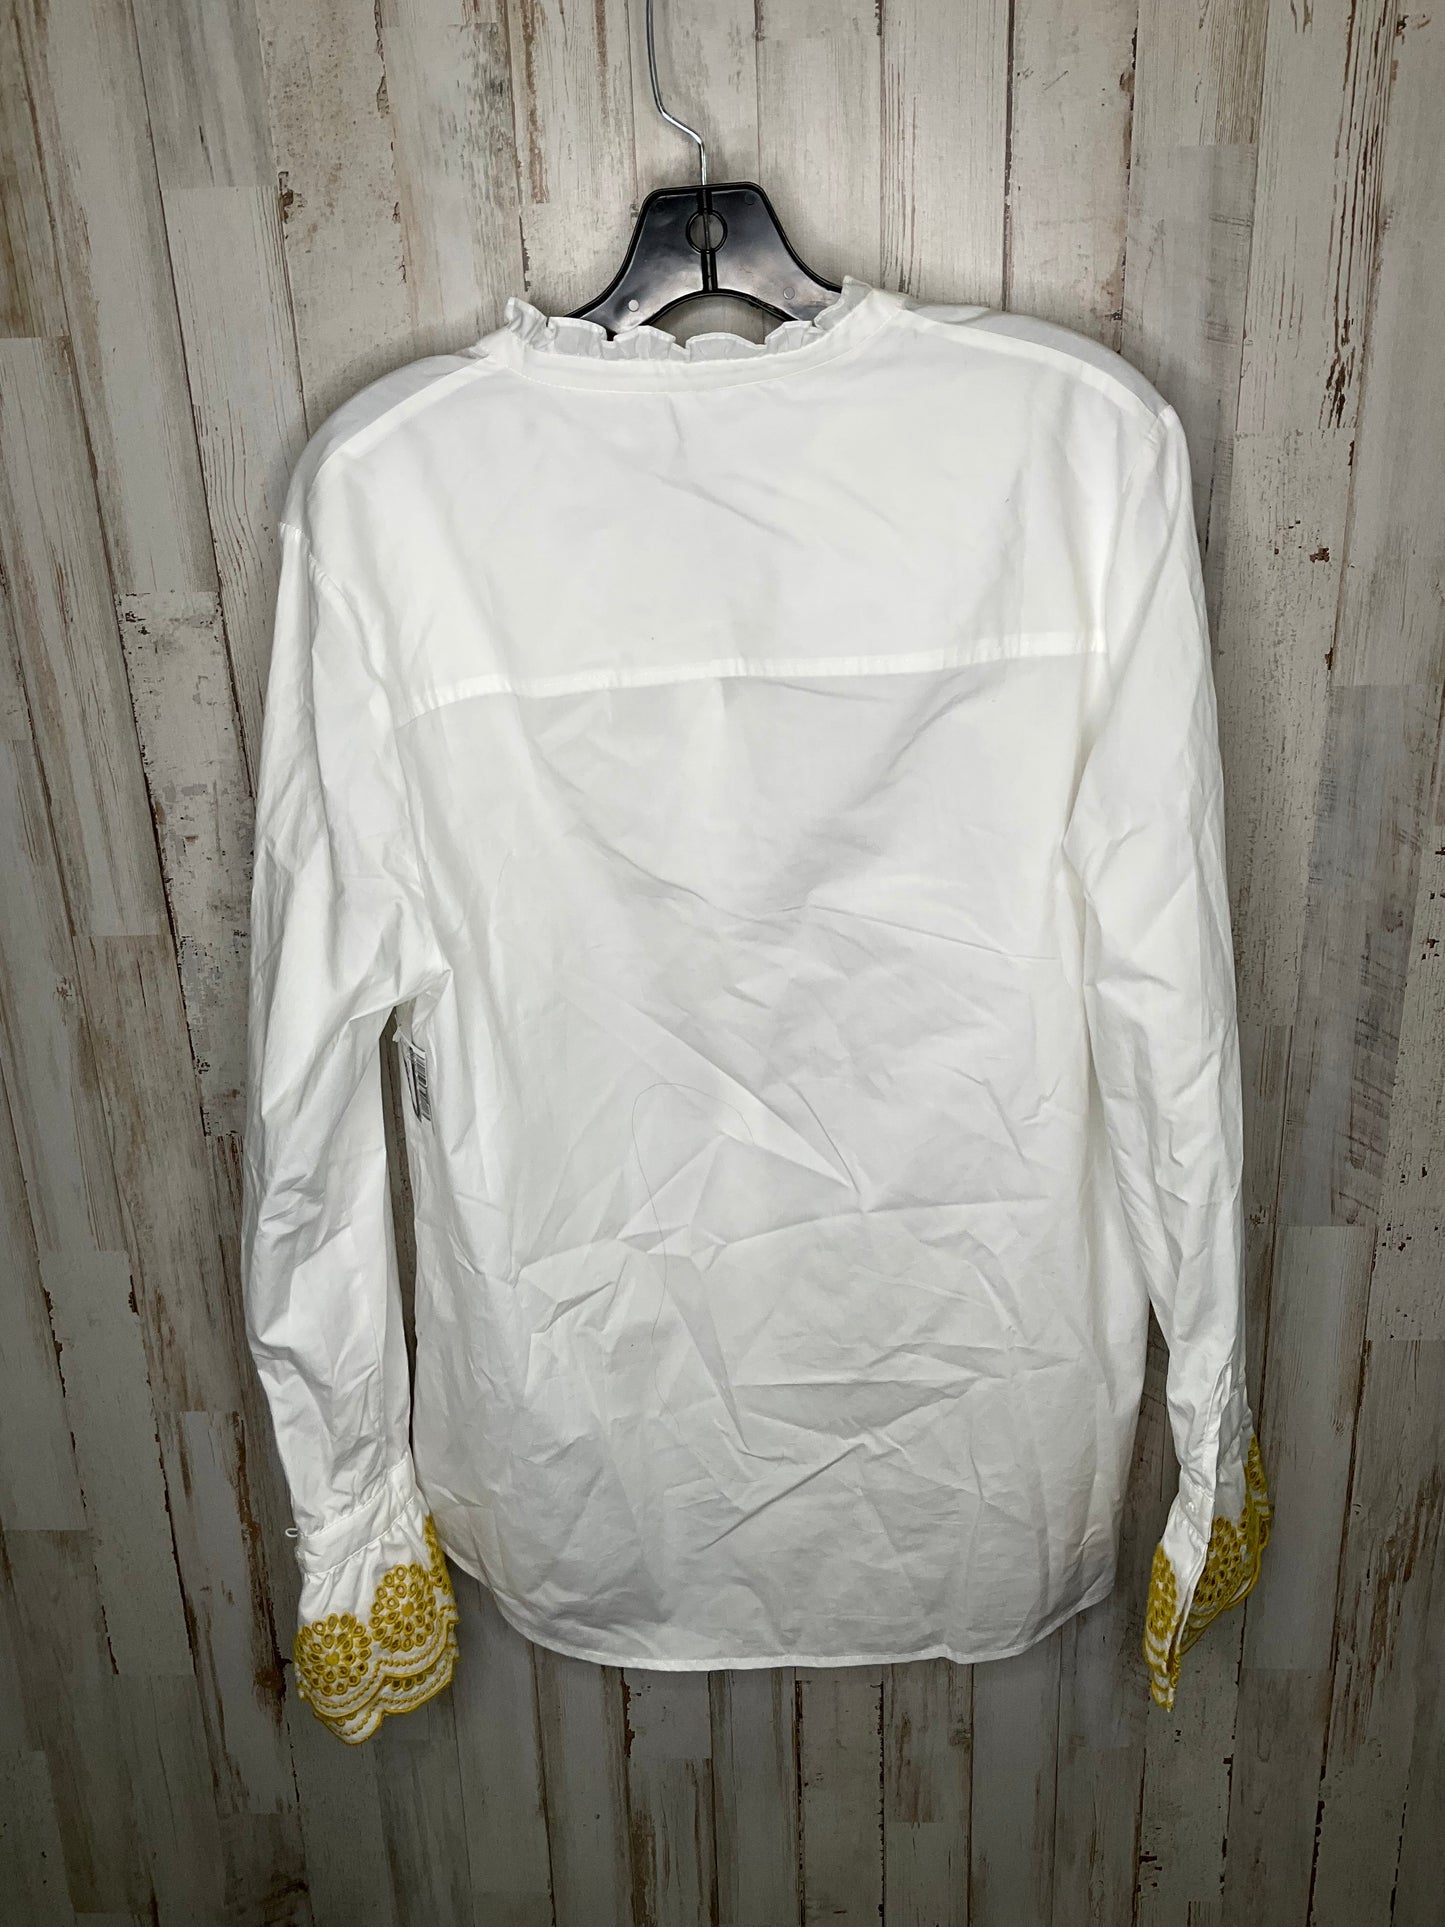 White & Yellow Top Long Sleeve Boden, Size 14